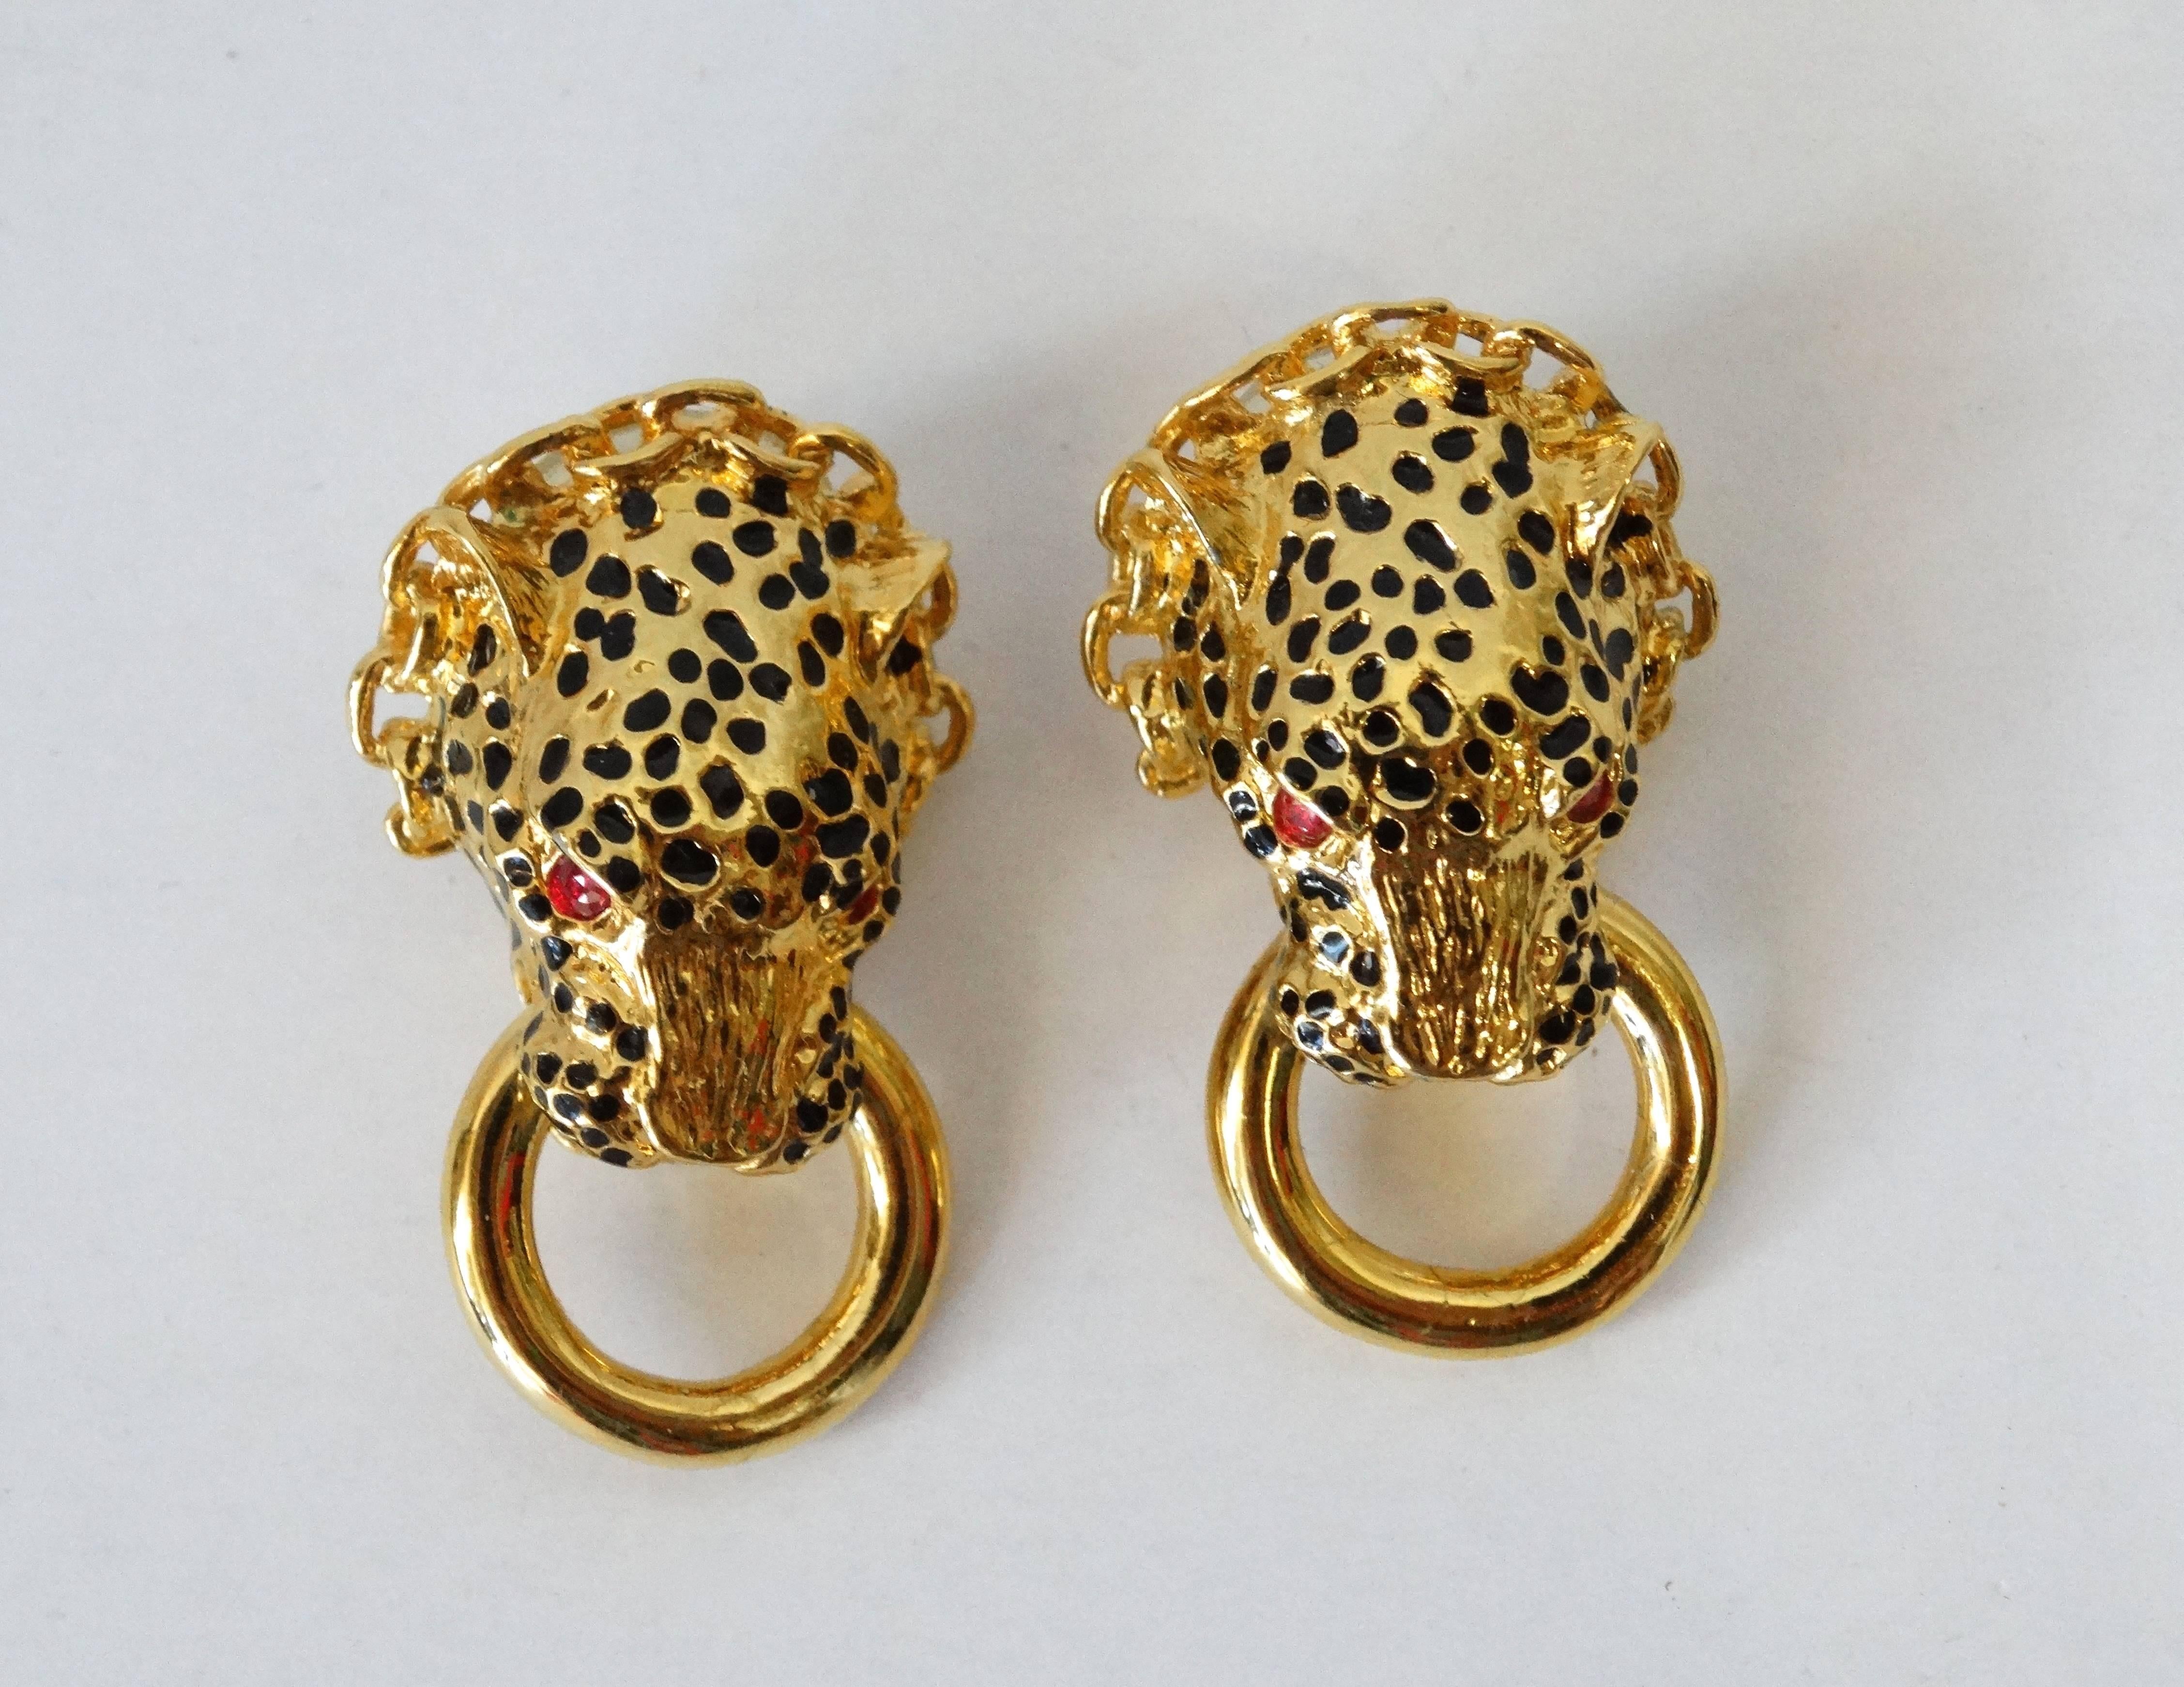 A fabulous pair of 1980's Franklin Mint The Duchess Of Windsor Panther pierced earring with ruby rhinestone eyes. Signed Circa 89 FM on the inside by the pierced post. Plated gold, with Black enamel spots. 1.5 inches long! Matching Bracelet and